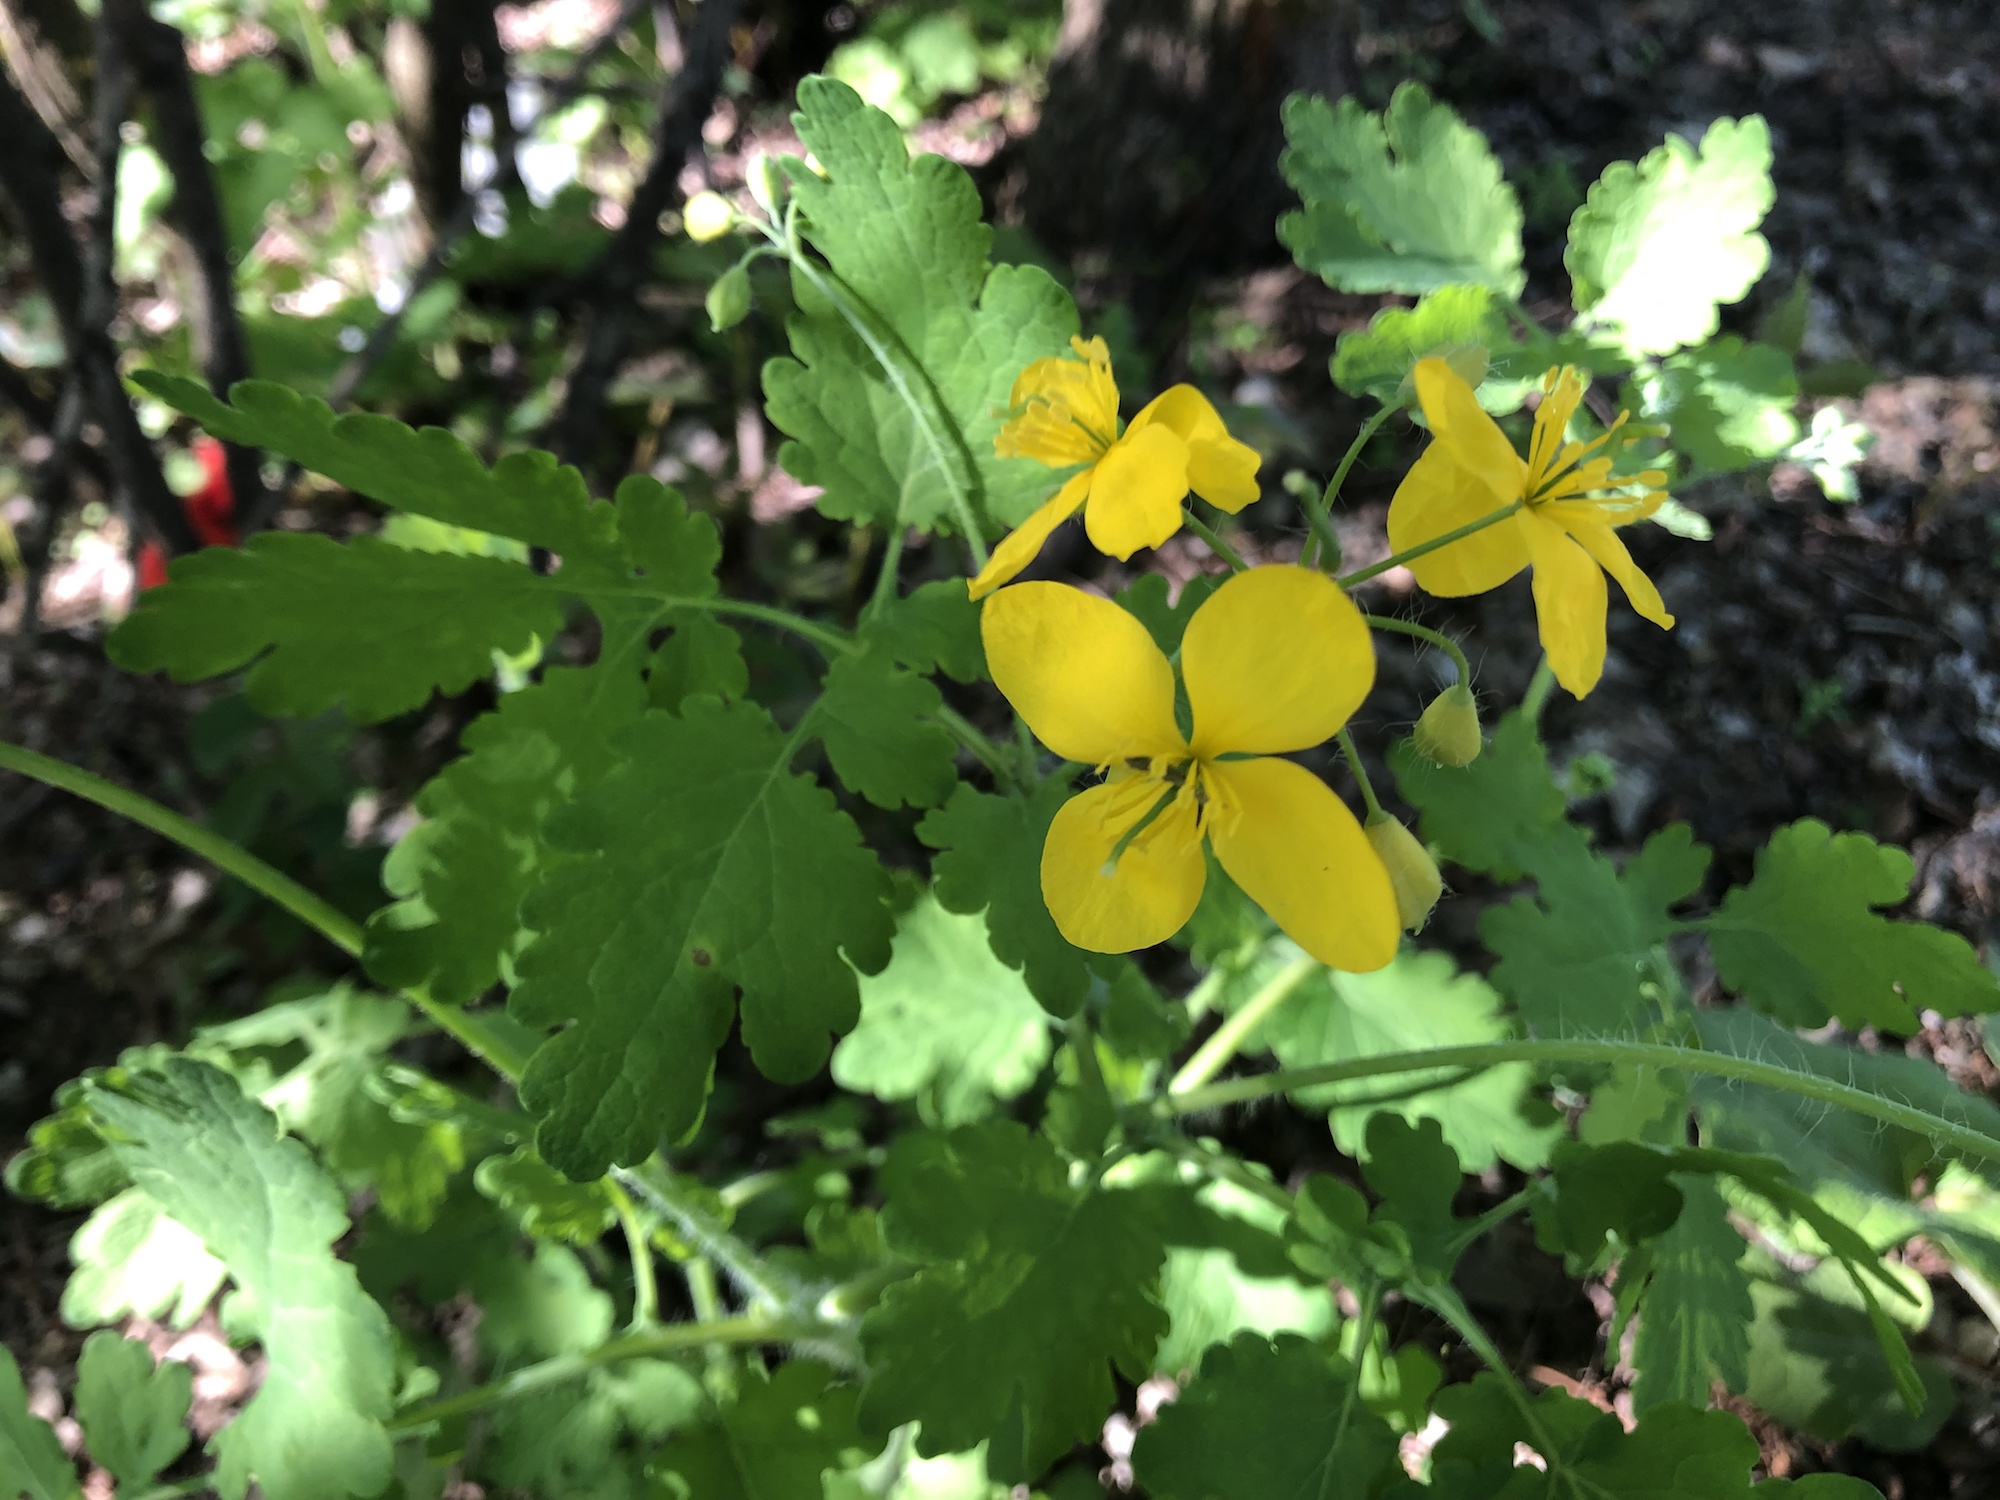 Greater Celandine on May 23, 2019.